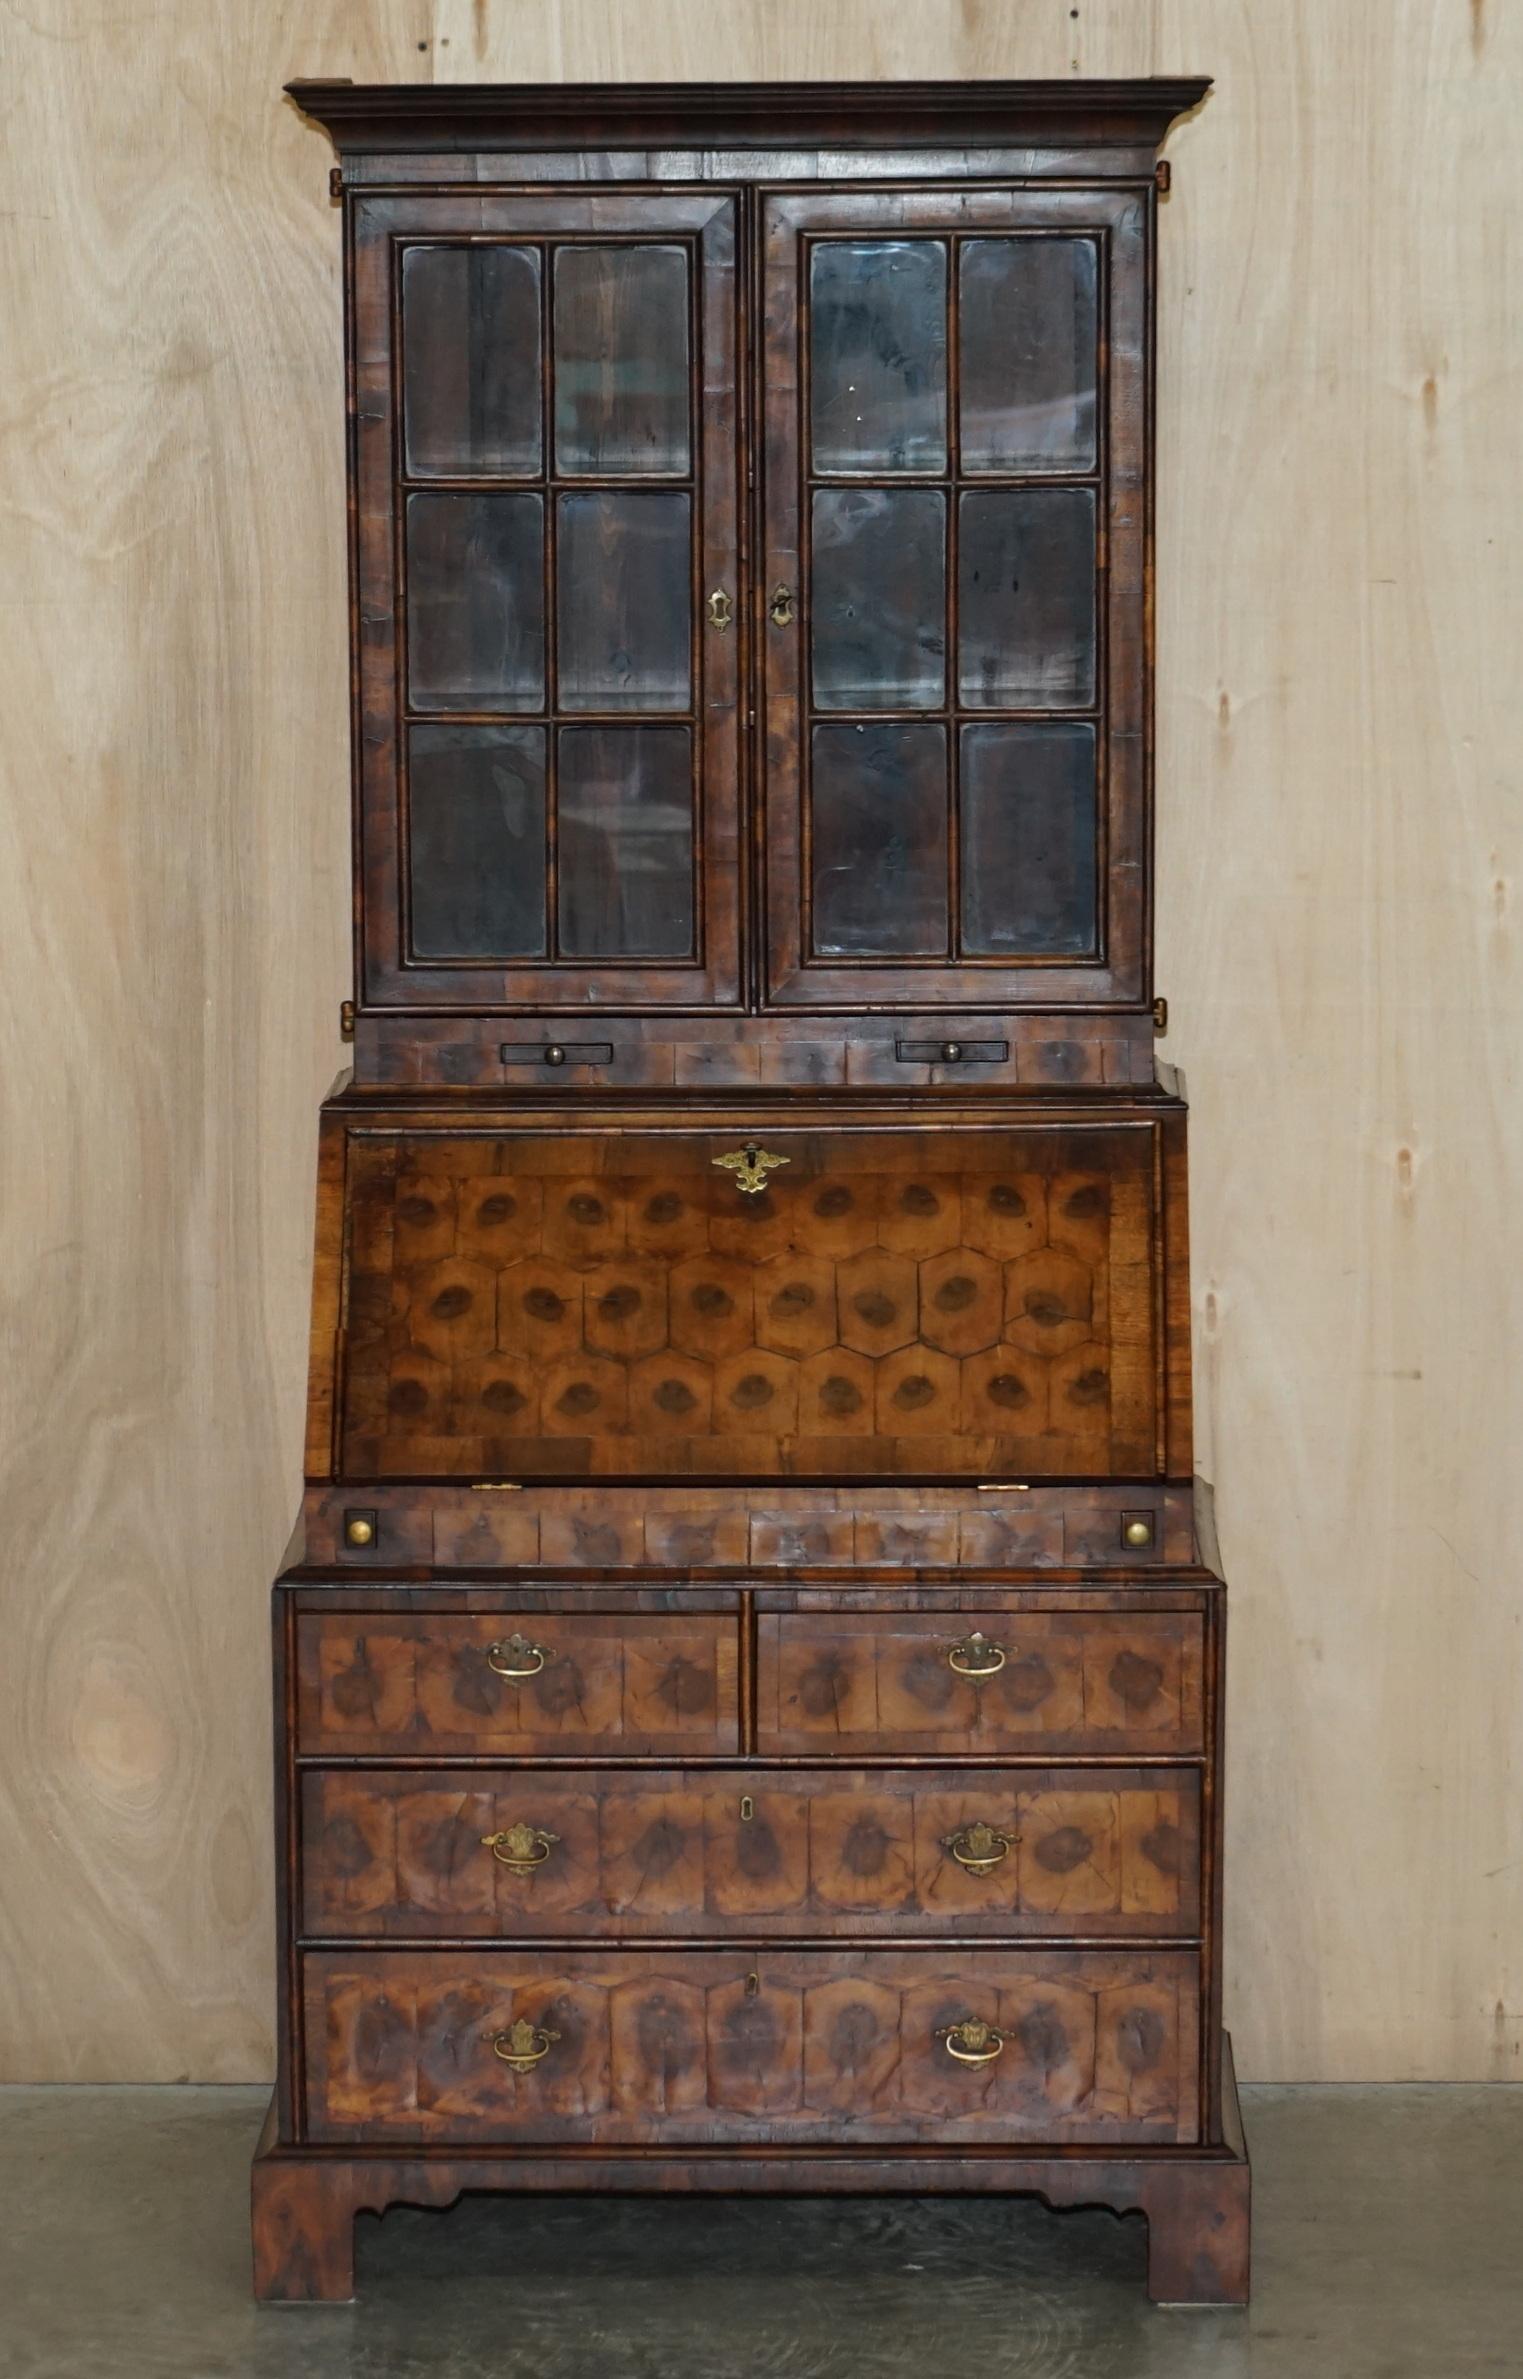 We are delighted to offer for sale this very fine and important Georgian circa 1780 Oyster veneer Bureau bookcase with original candle holders

A highly decorative and important bureau bookcase dating to the latter part of the 18th century. The